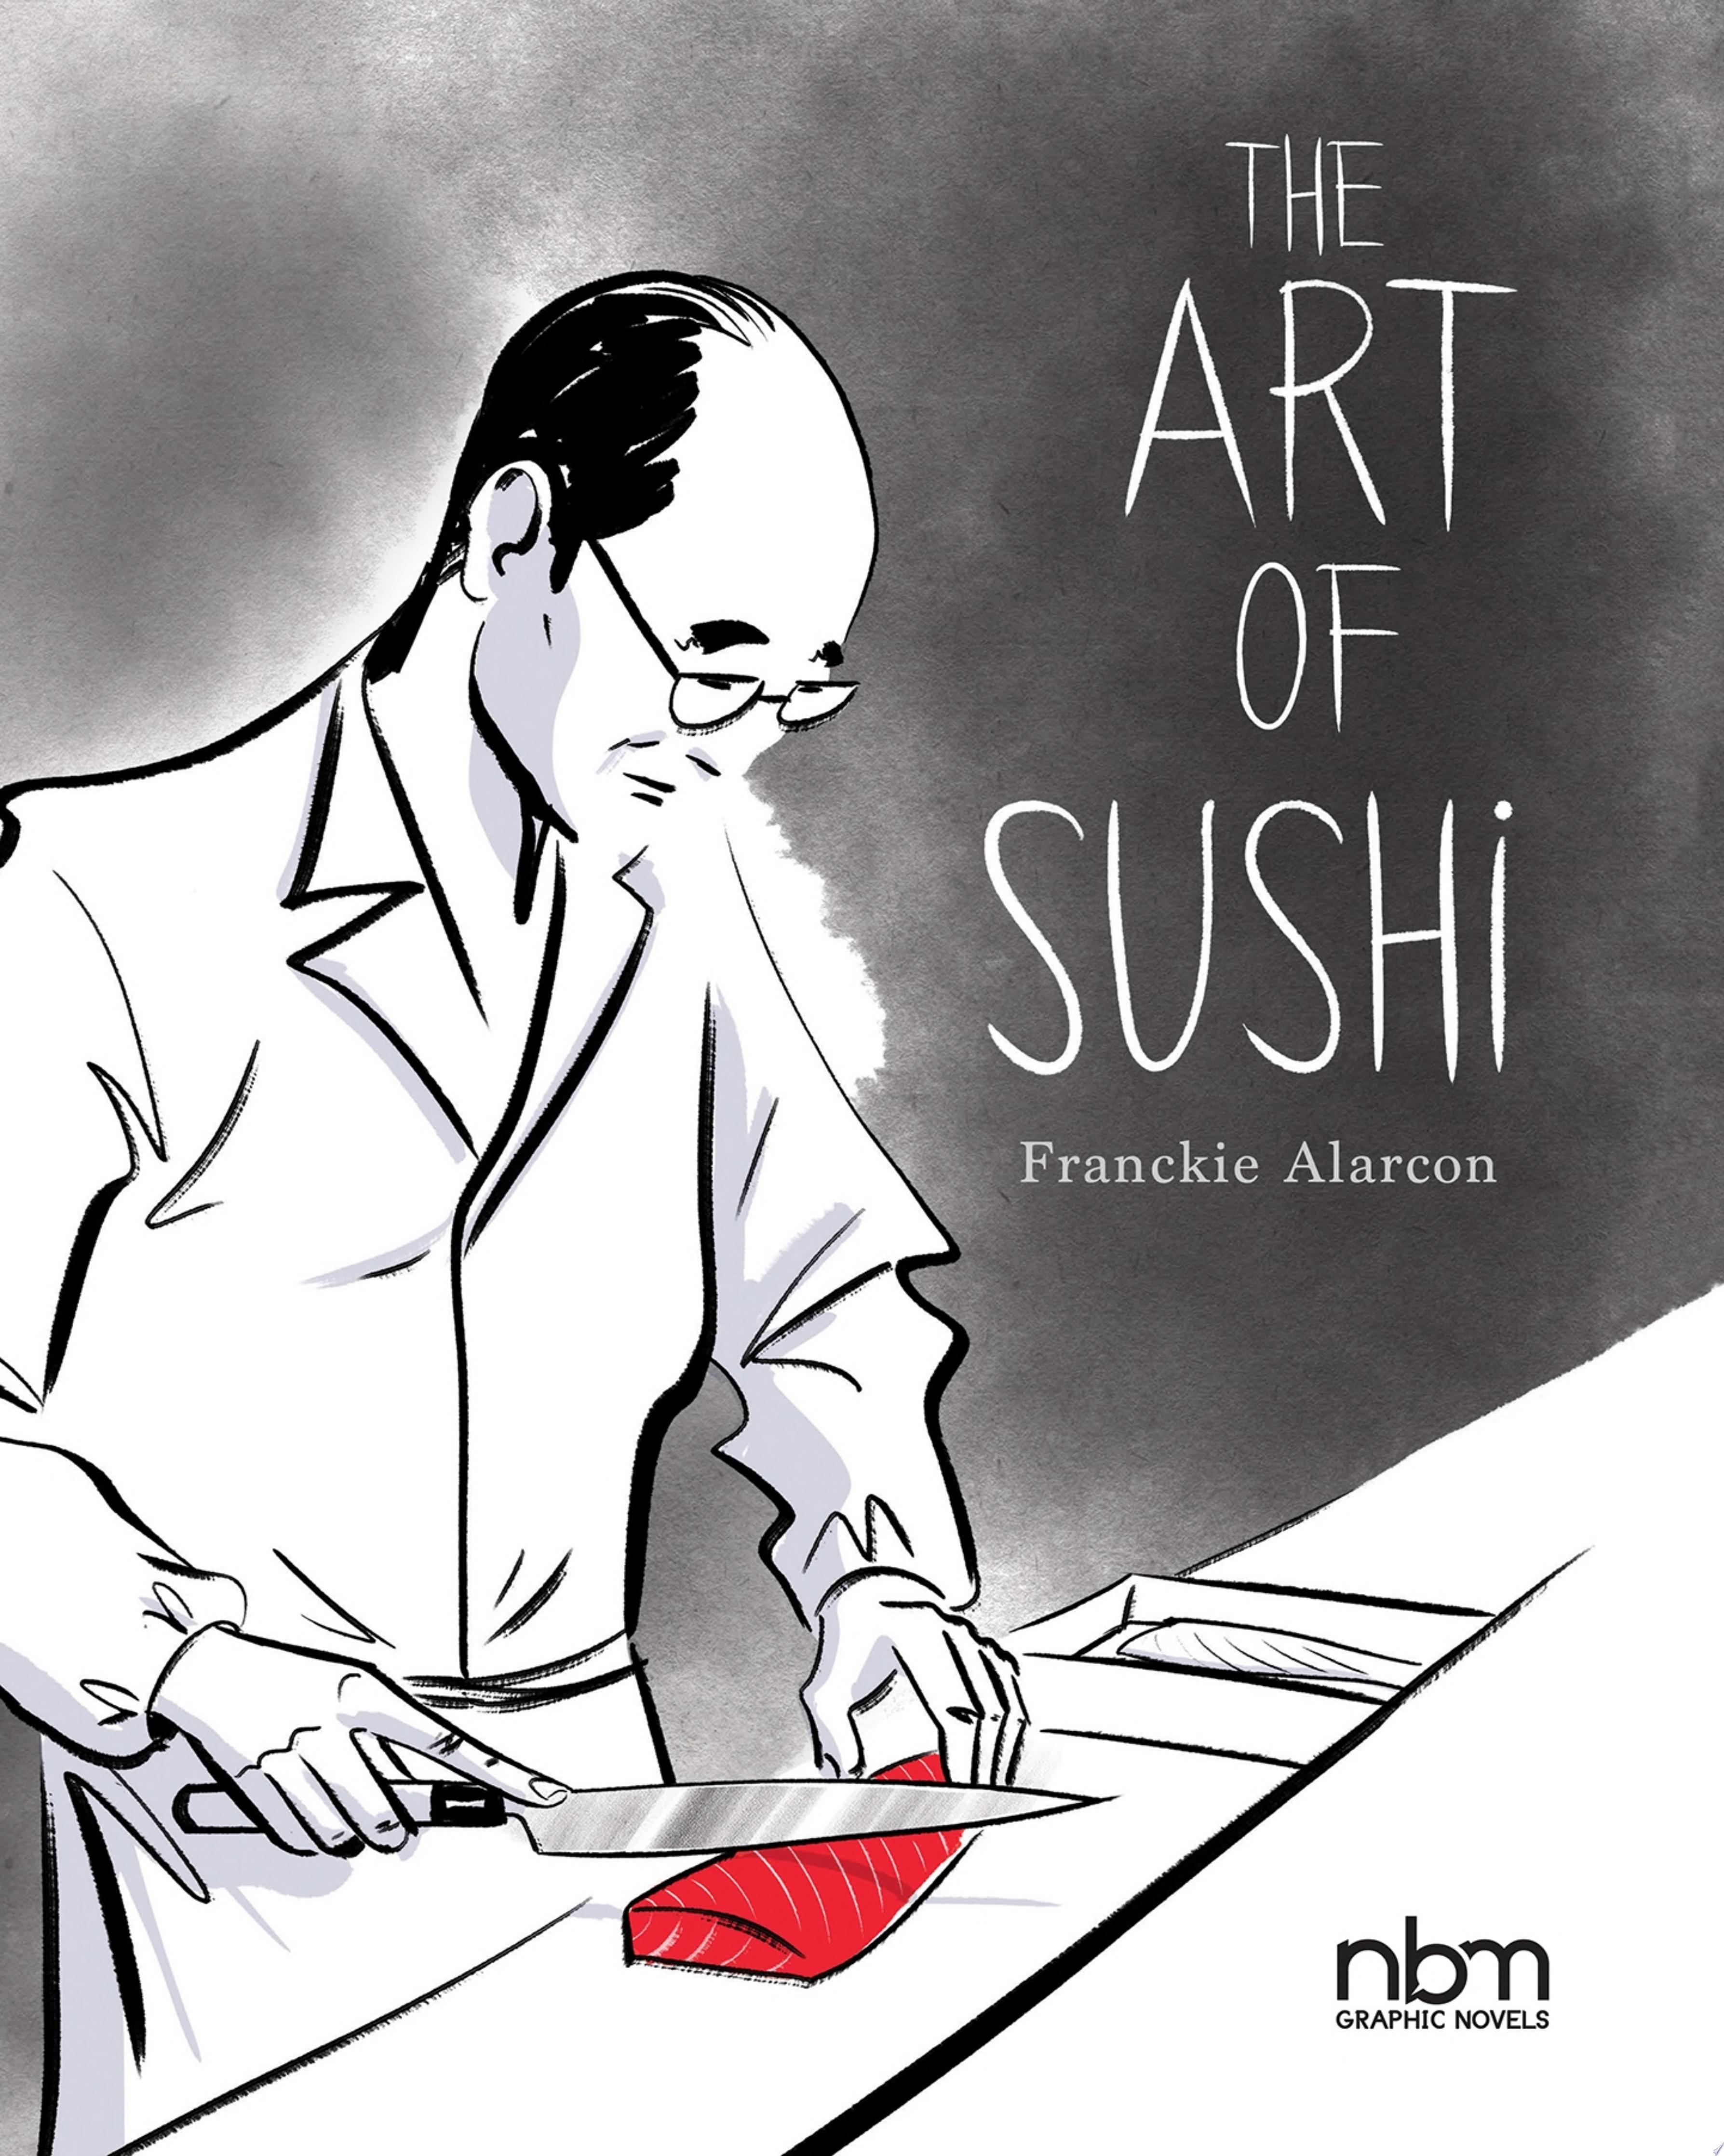 Image for "The Art of Sushi"